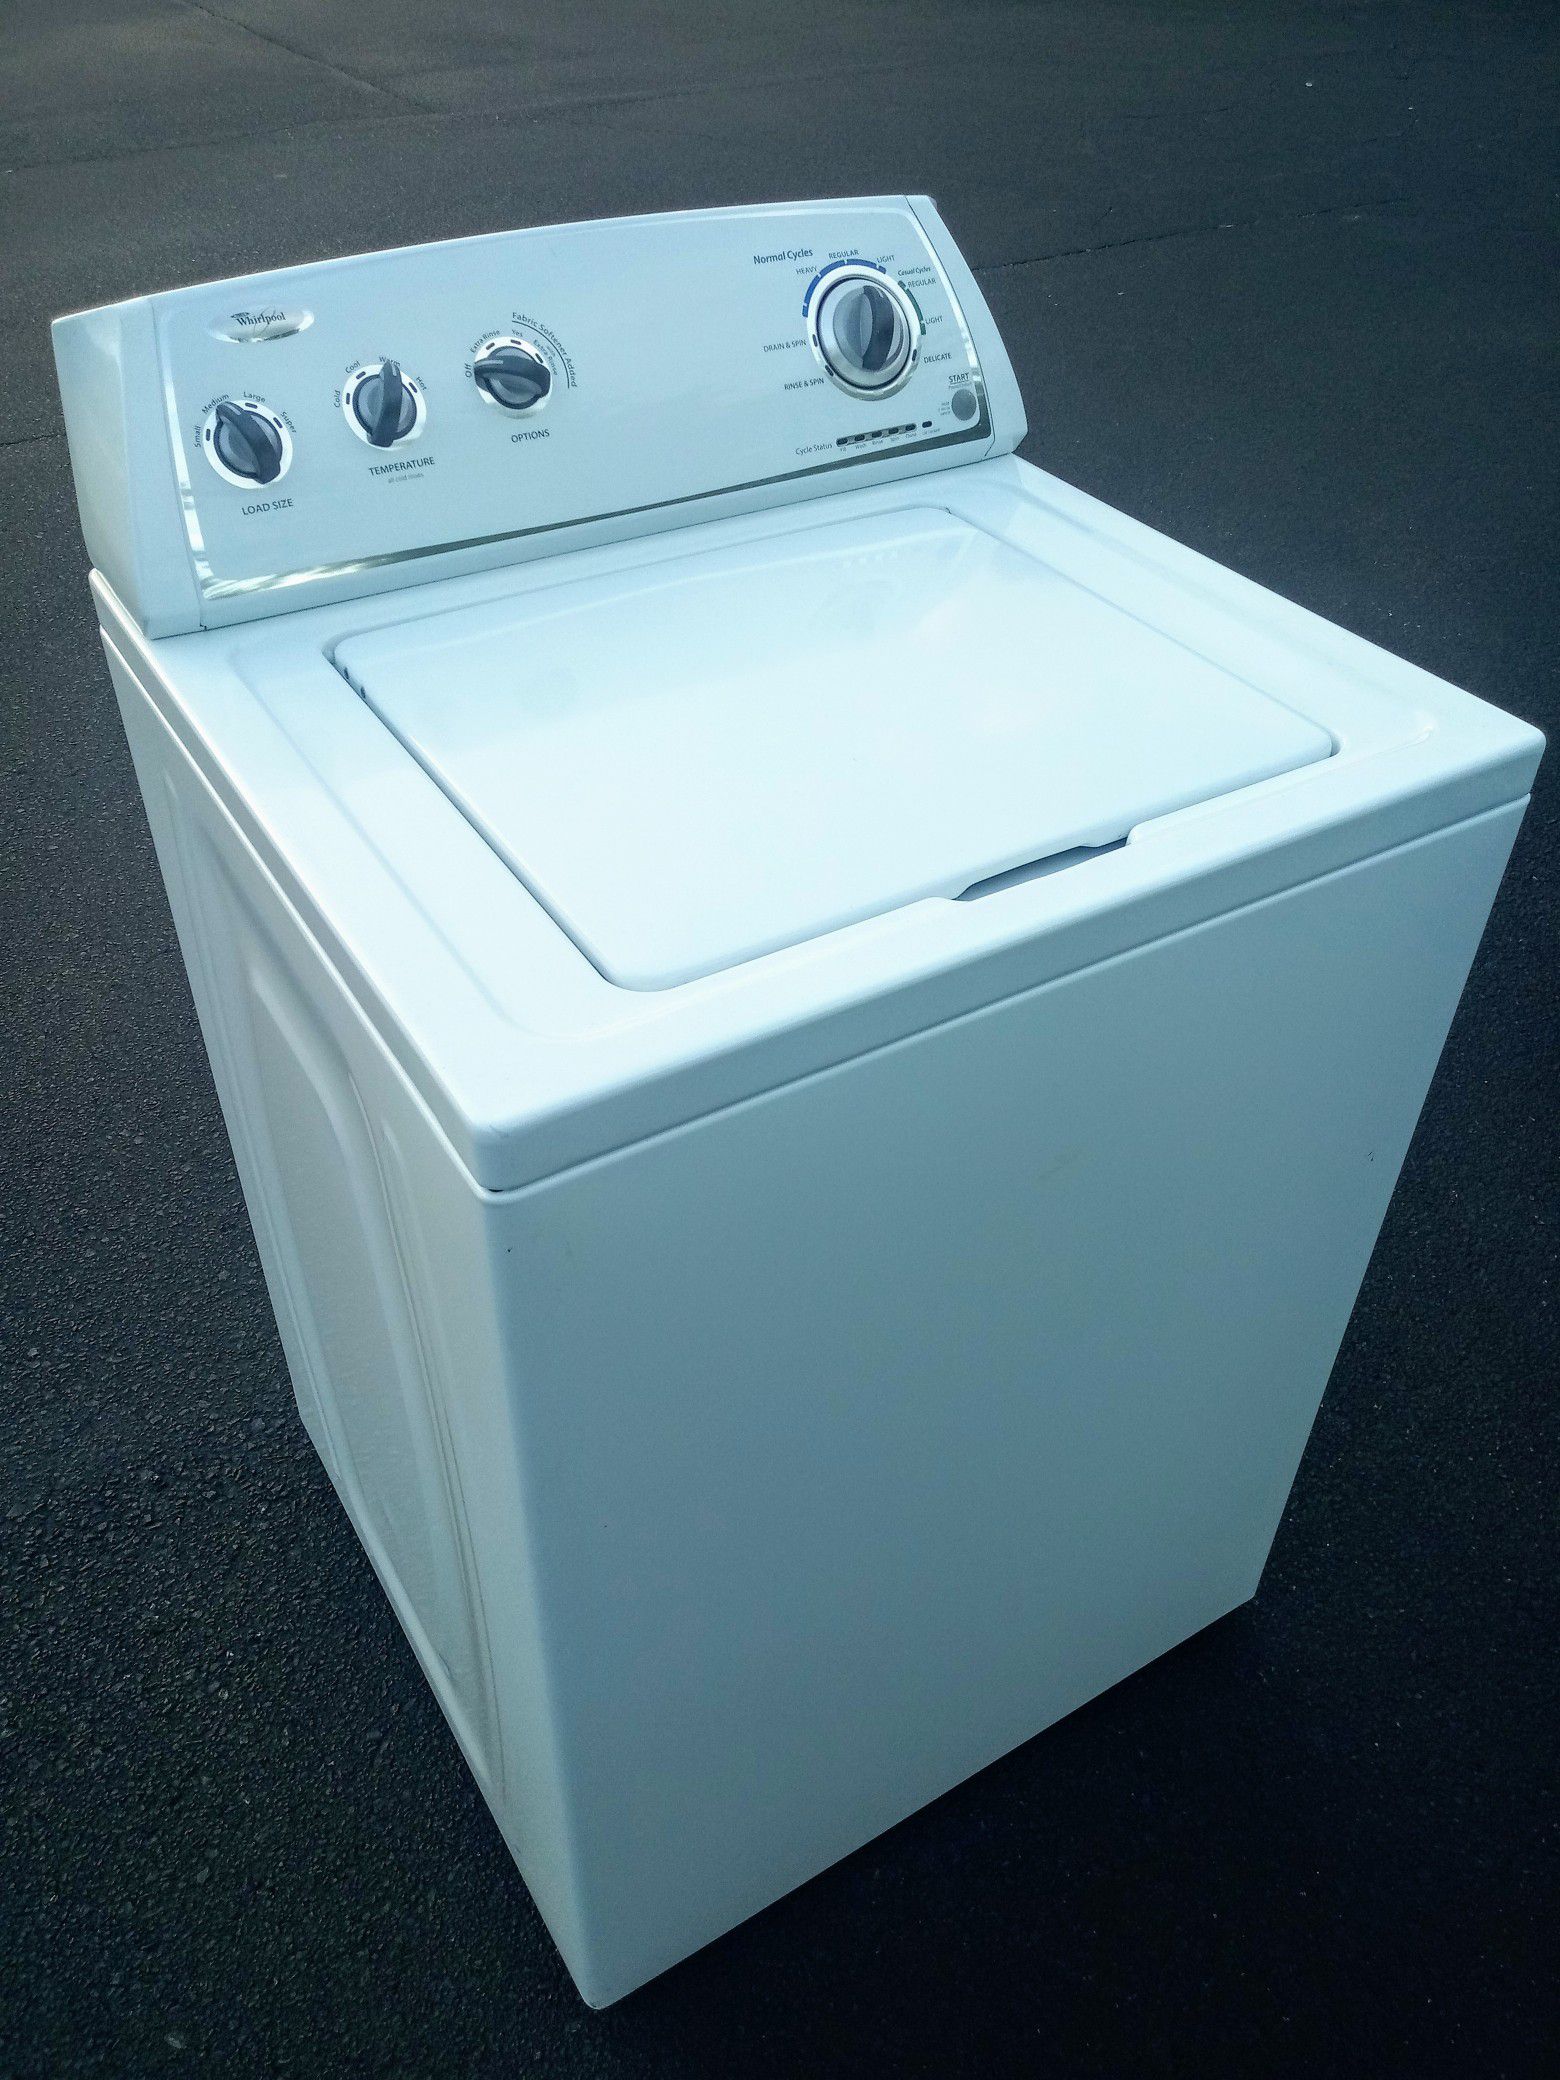 PRACTICALLY NEW WHIRLPOOL SUPER CAPACITY WASHER FREE DELIVERY